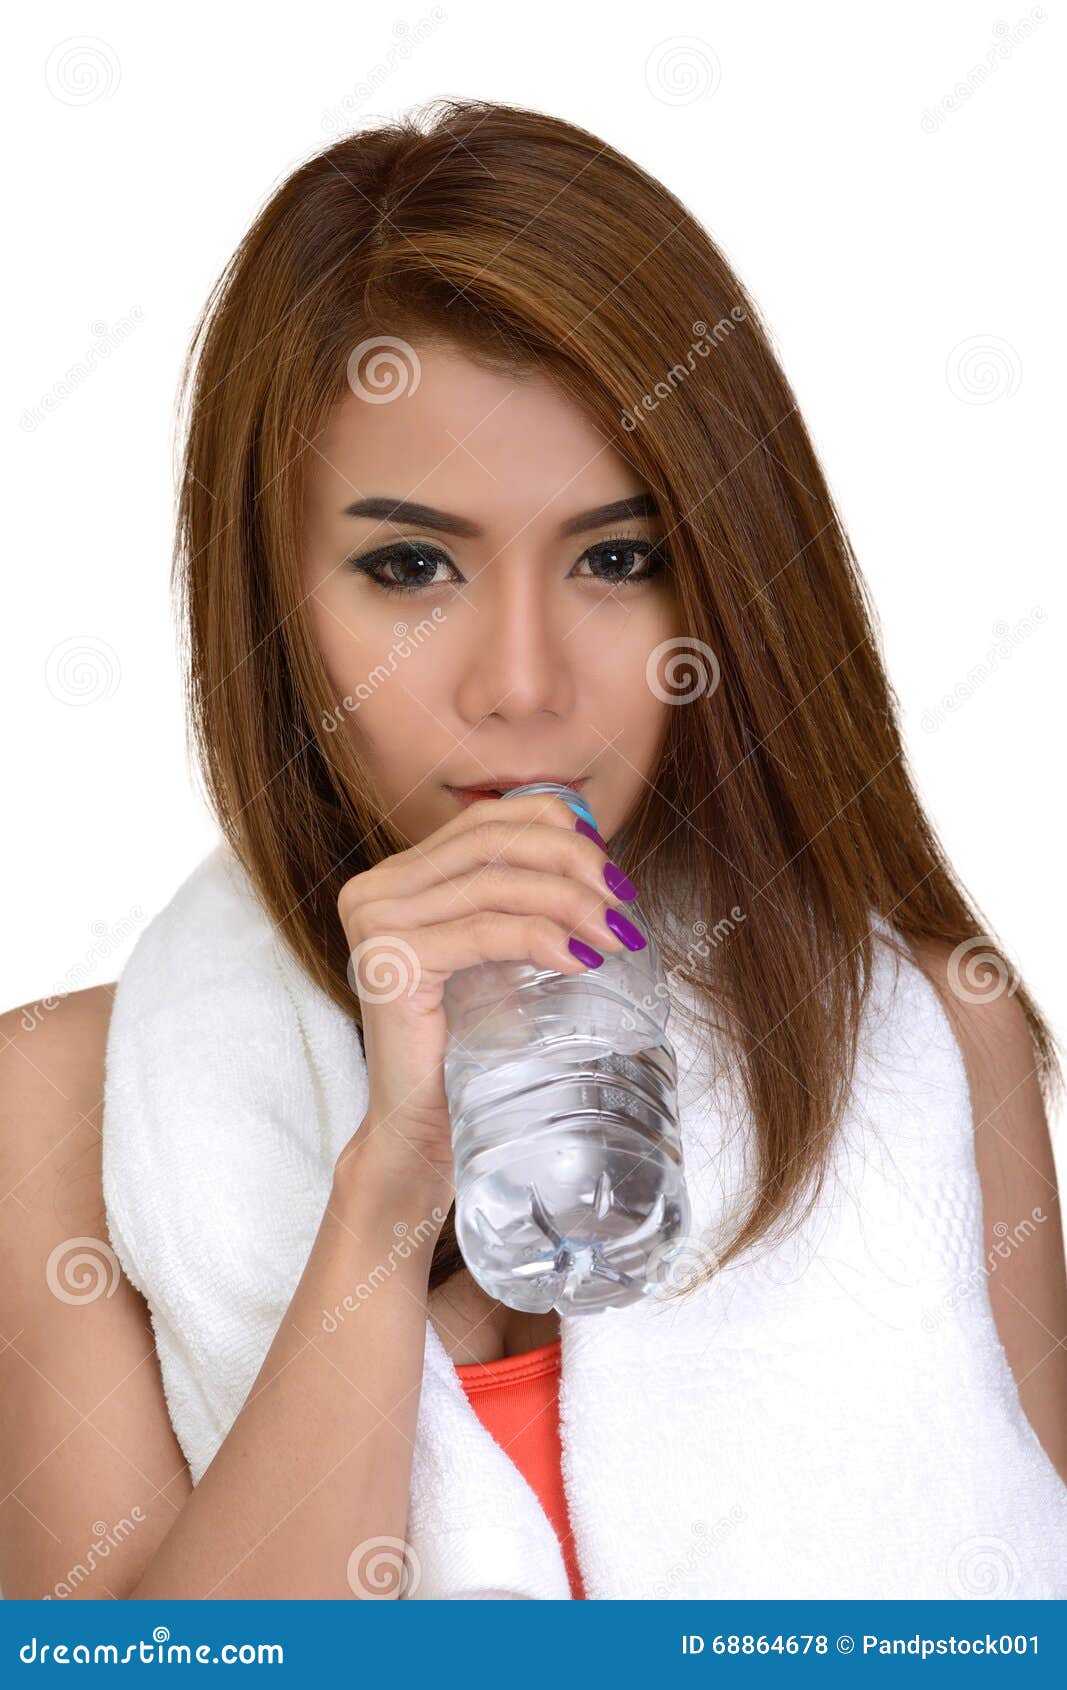 Child Girl Drinks Mineral Water From Bottle Stock Photo 